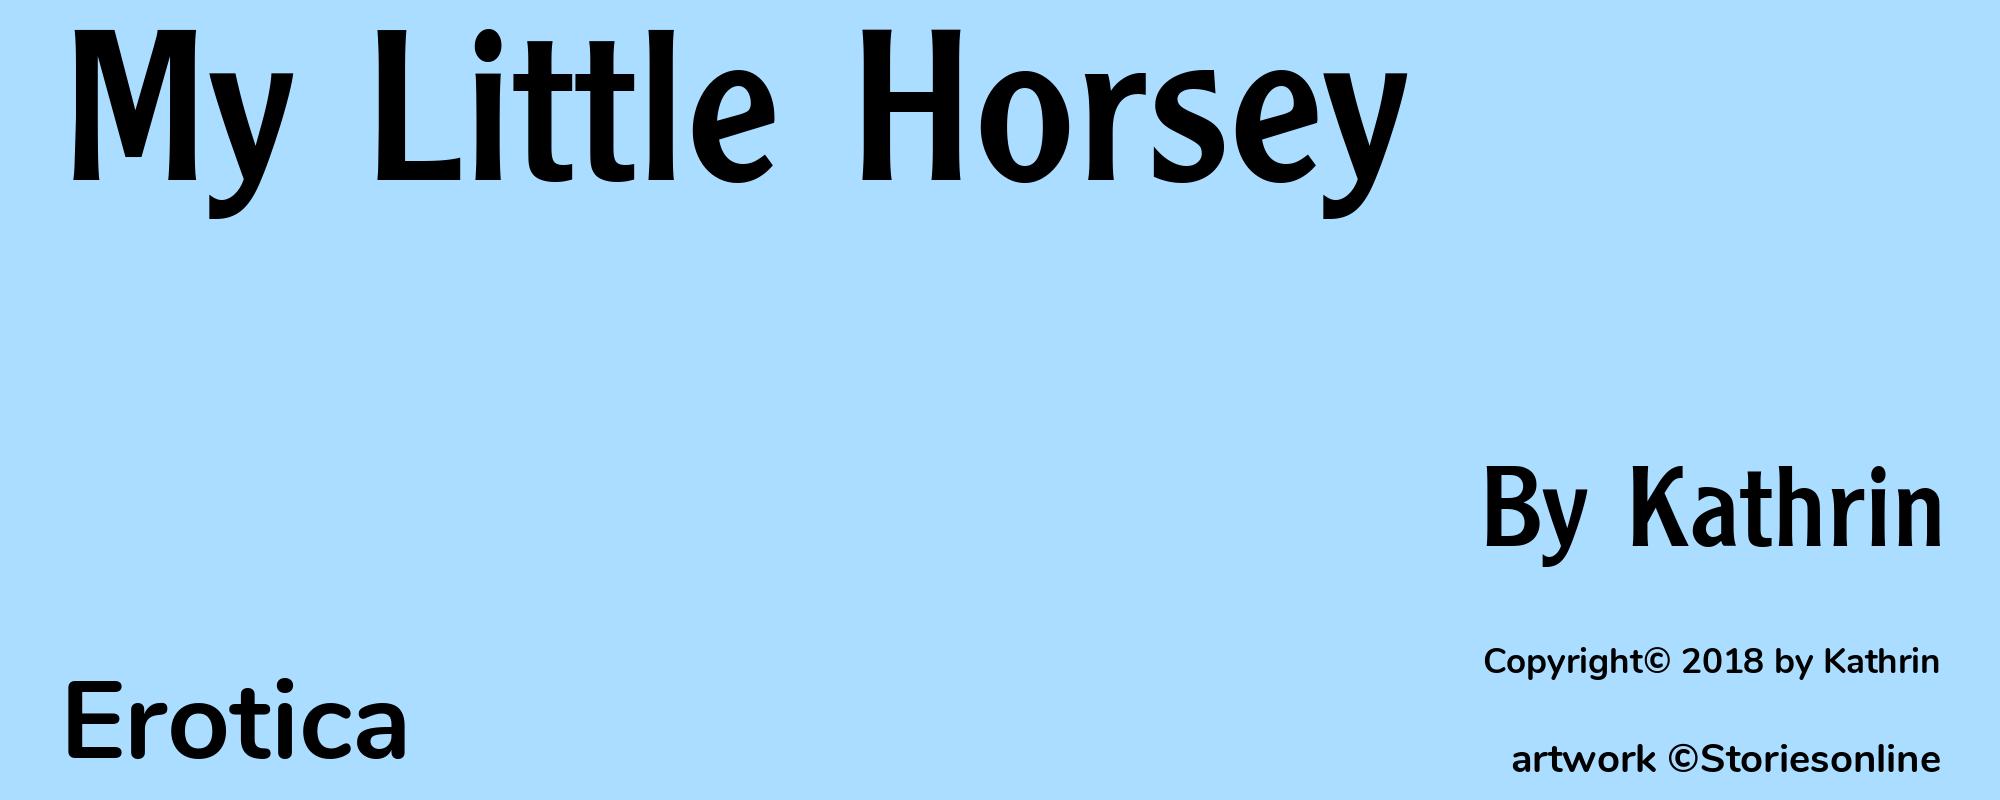 My Little Horsey - Cover